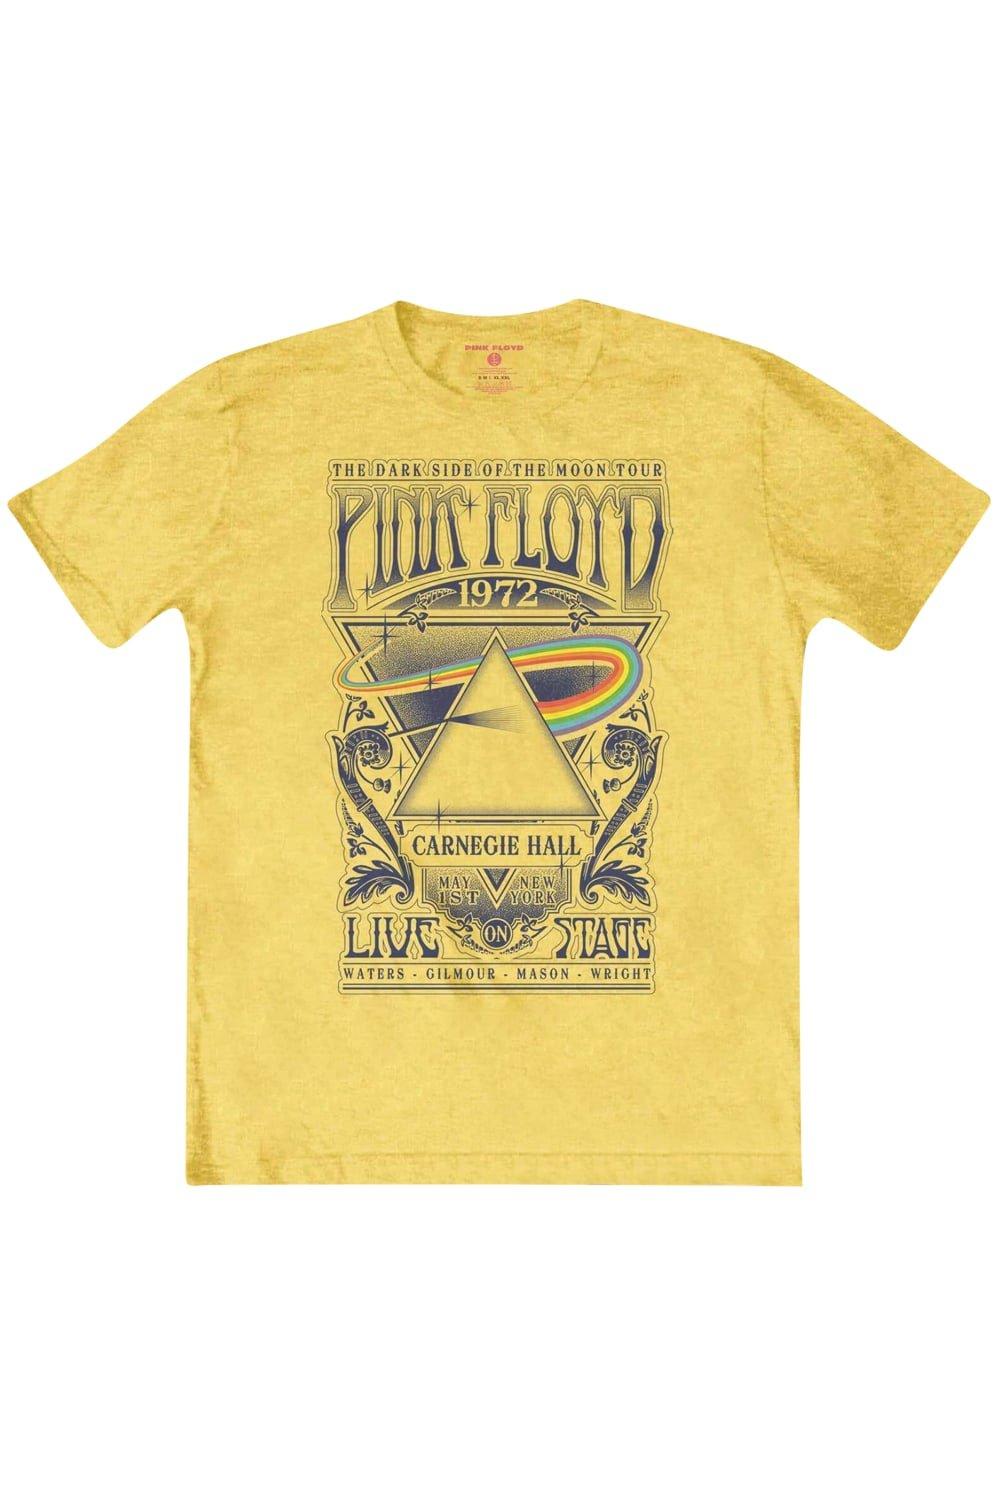 Carnegie Hall Poster T-Shirt